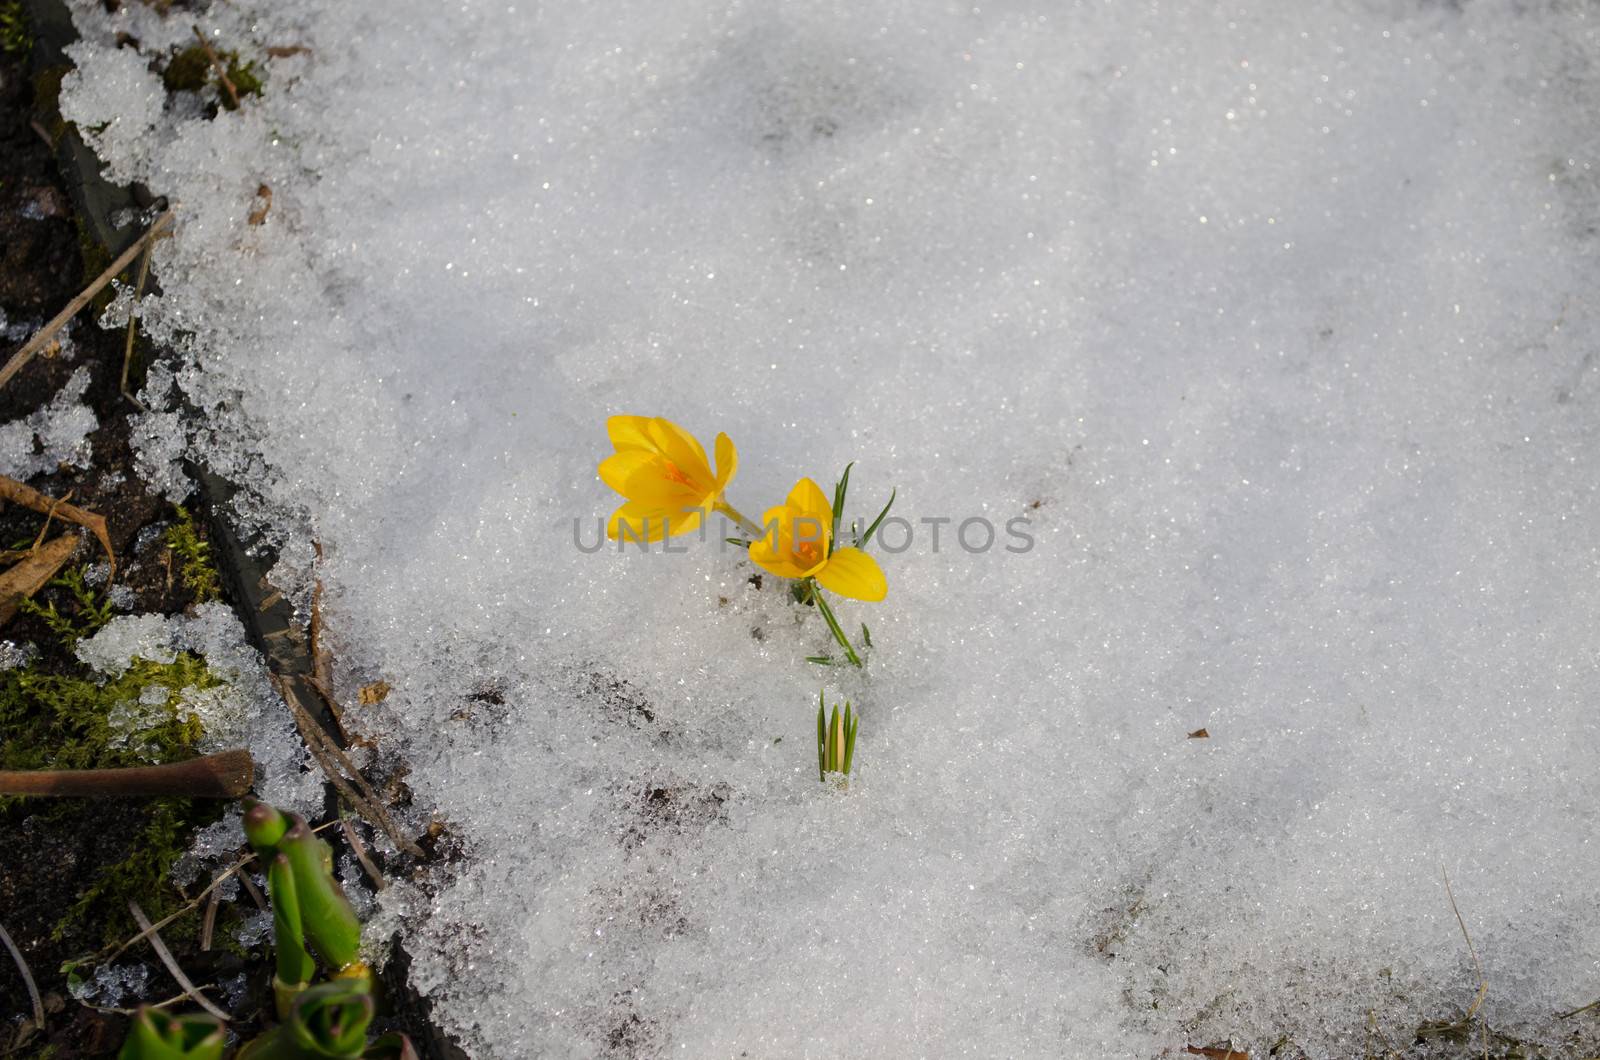 small delicate yellow crocuses flowers surrounded by white snow